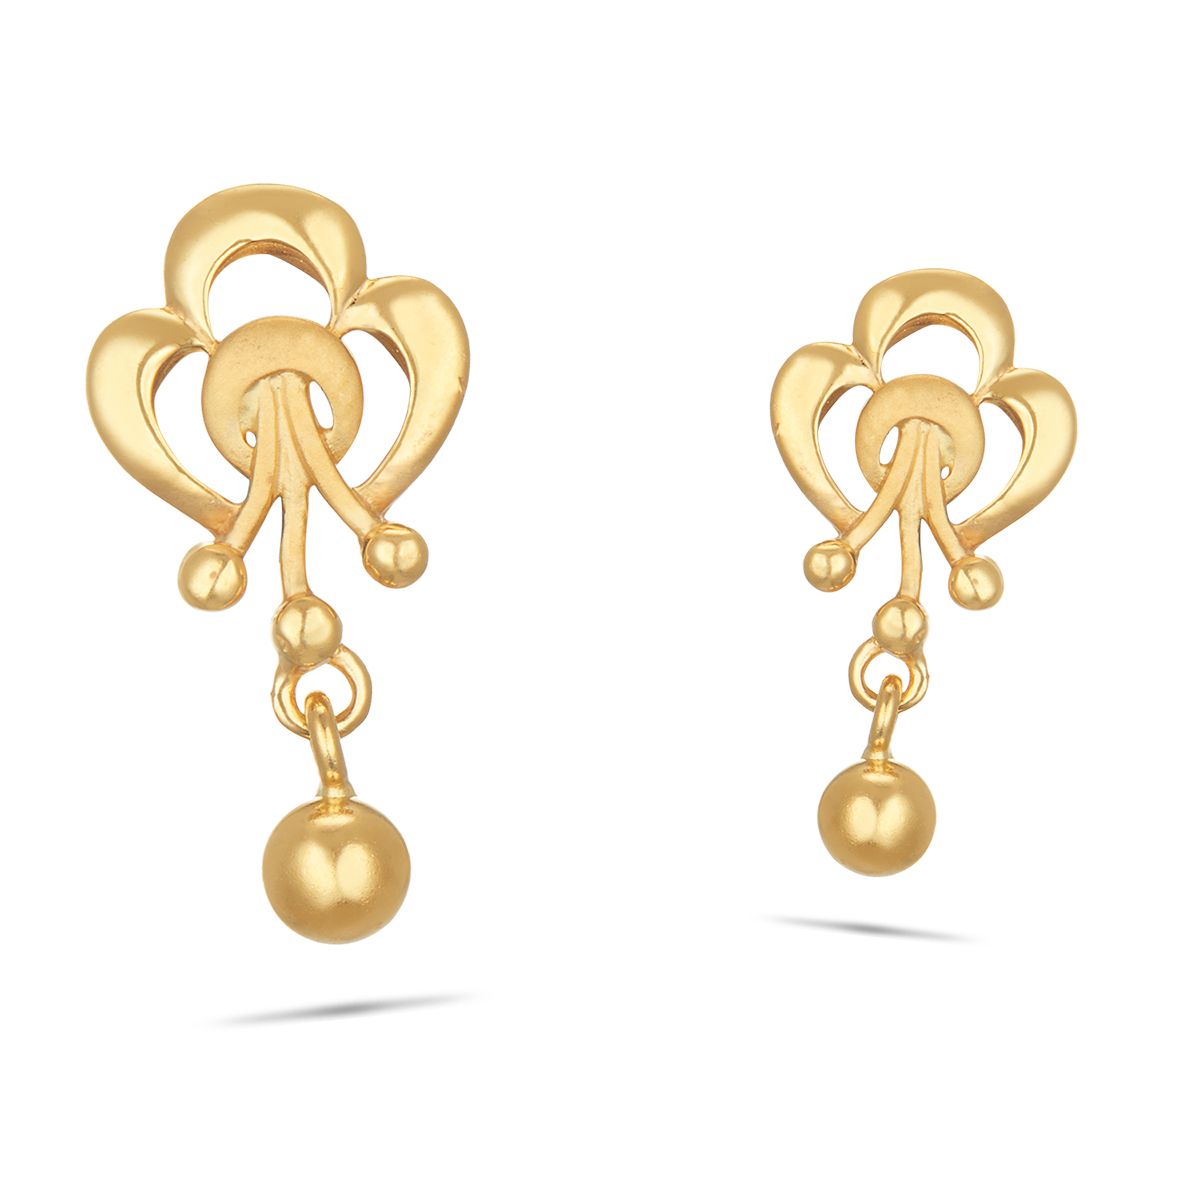 Best Gold Earring Designs for Daily Use - Jewellery Blog